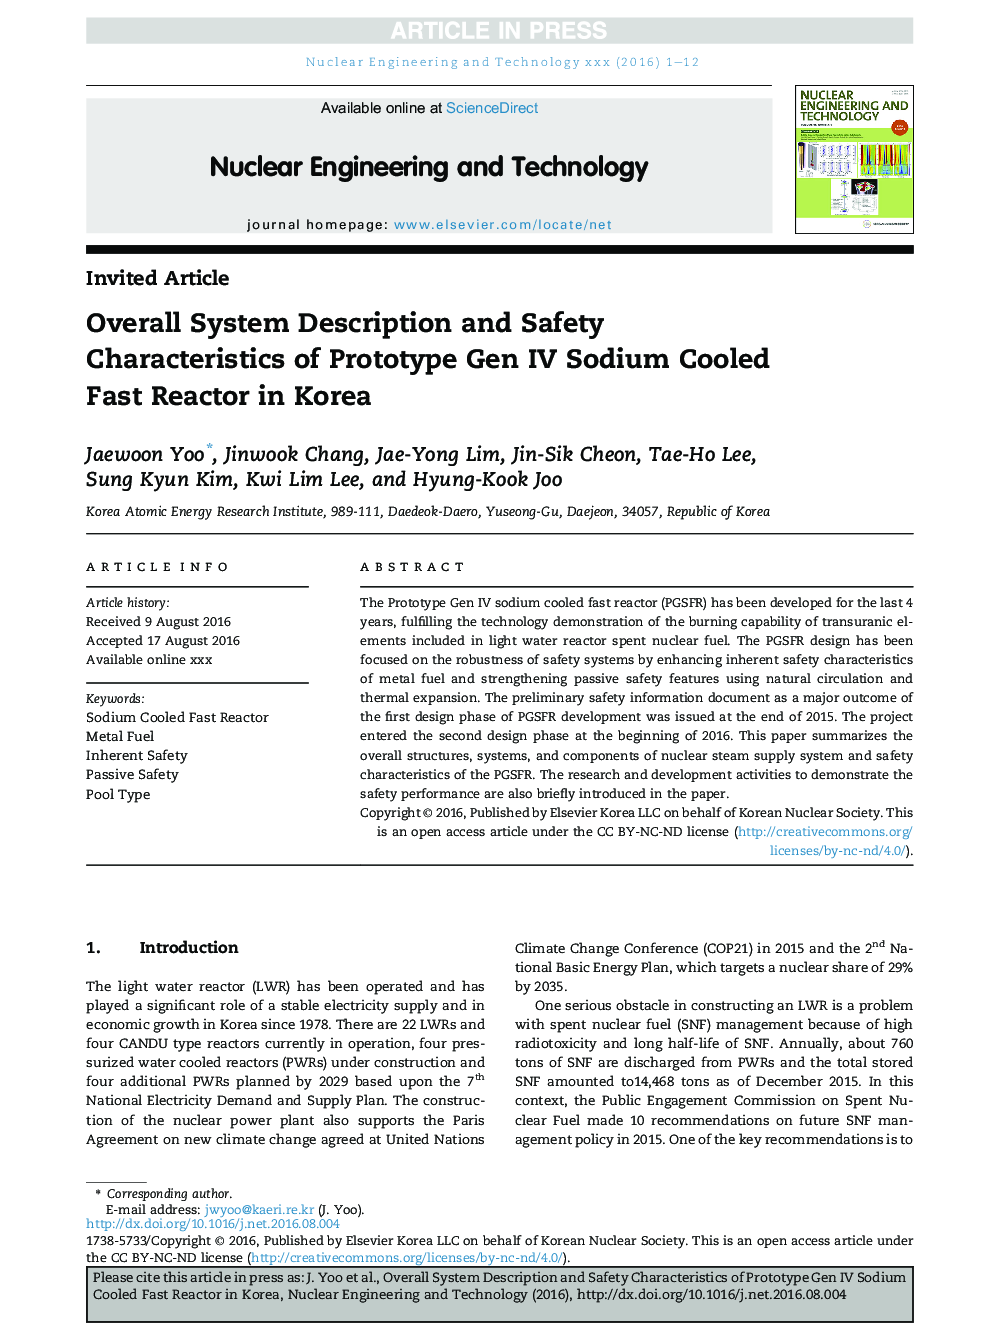 Overall System Description and Safety Characteristics of Prototype Gen IV Sodium Cooled Fast Reactor in Korea